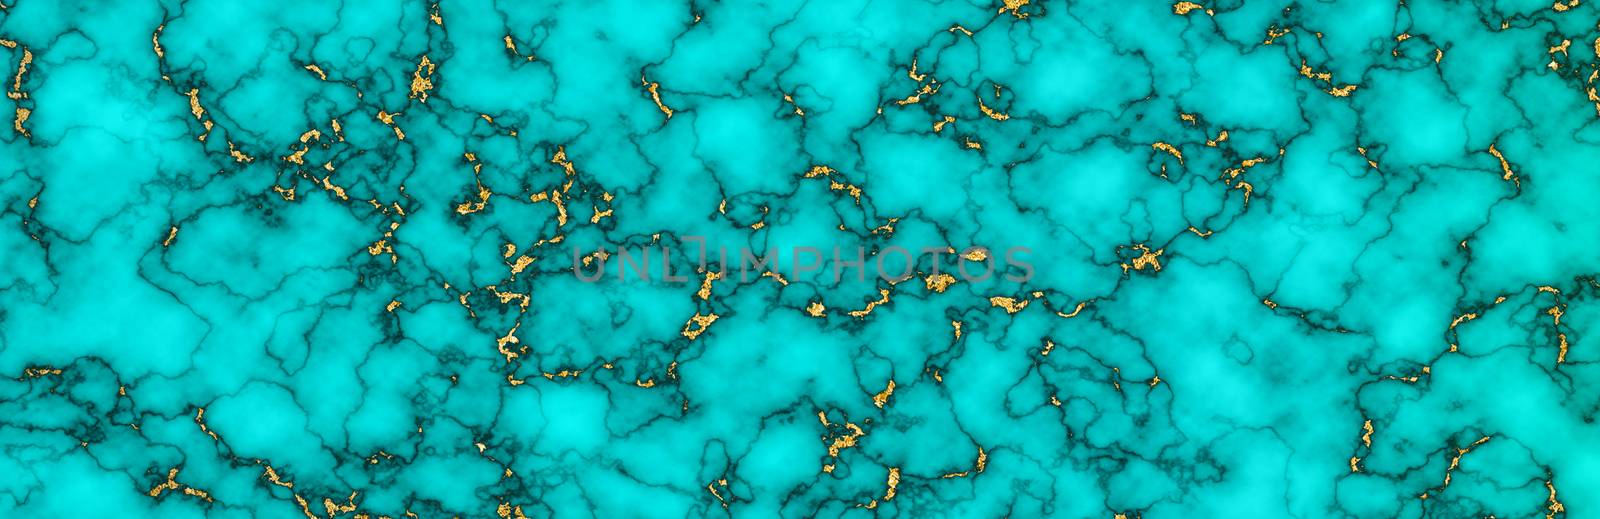 gold mineral granite and blue marble sheet type two luxury inter by Darkfox